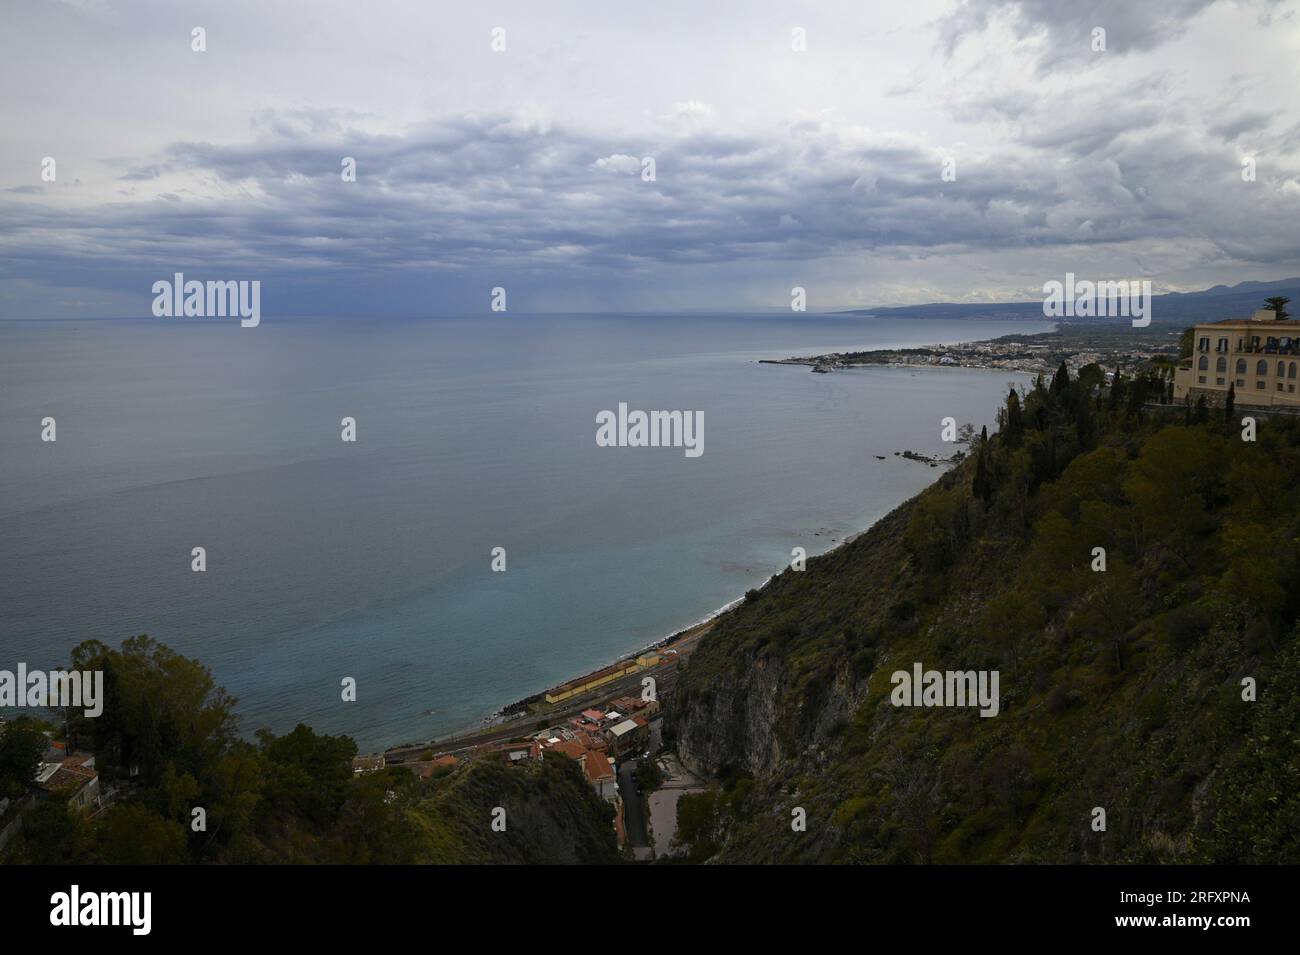 Scenic view of Giardini Naxos as seen from Parco Trevelyan a public garden and local attraction known as Villa Comunale in Taormina Sicily, Italy. Stock Photo